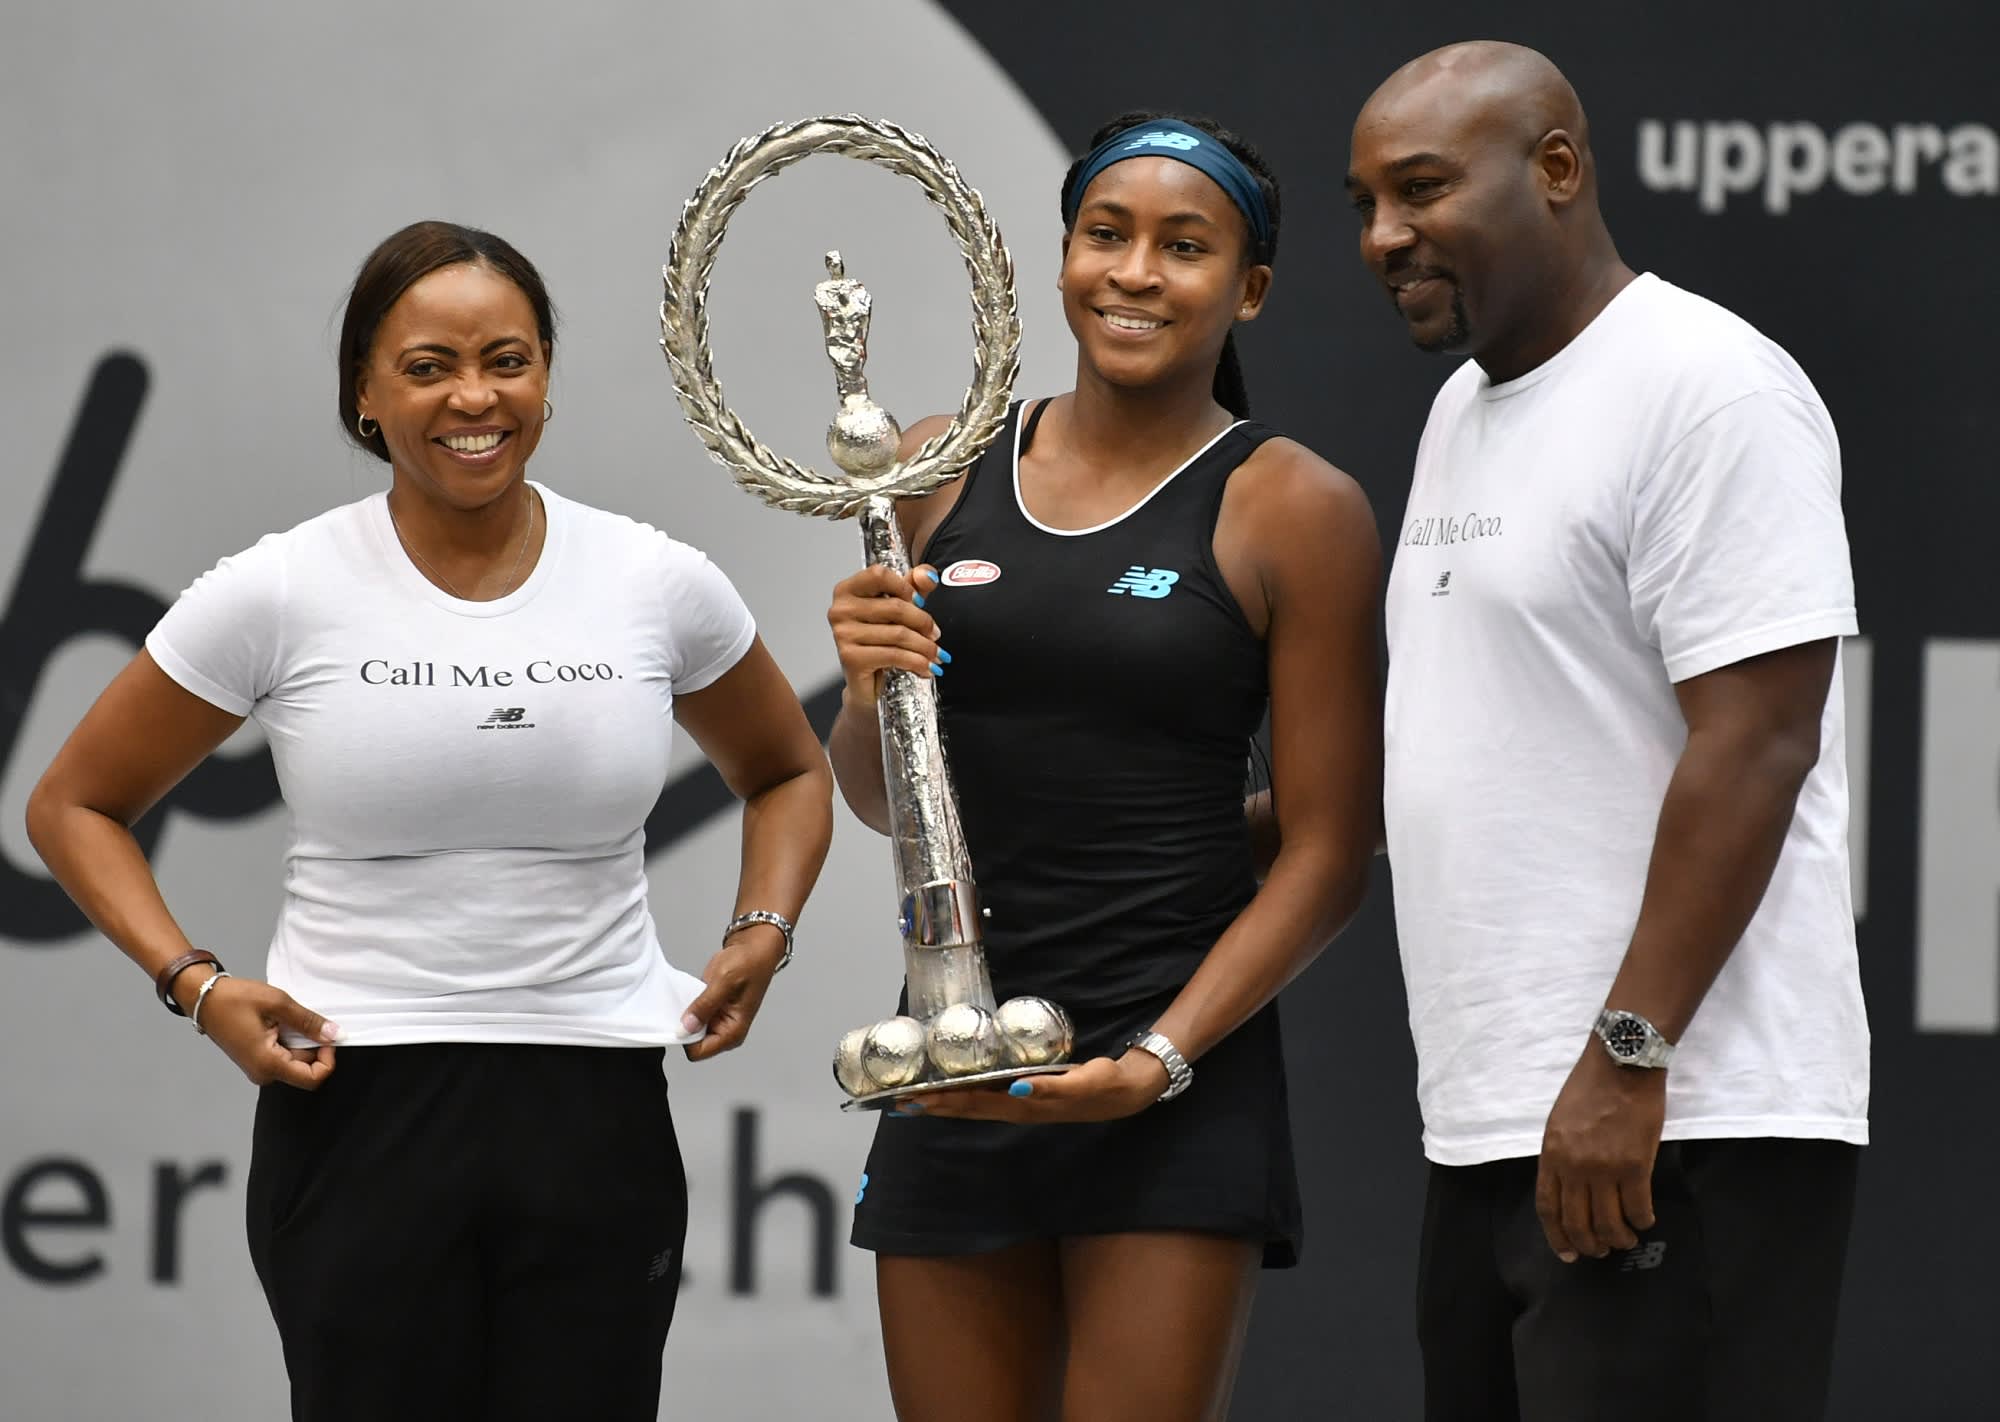 Are Coco Gauff parents still together? Where do Coco Gauff parents live?